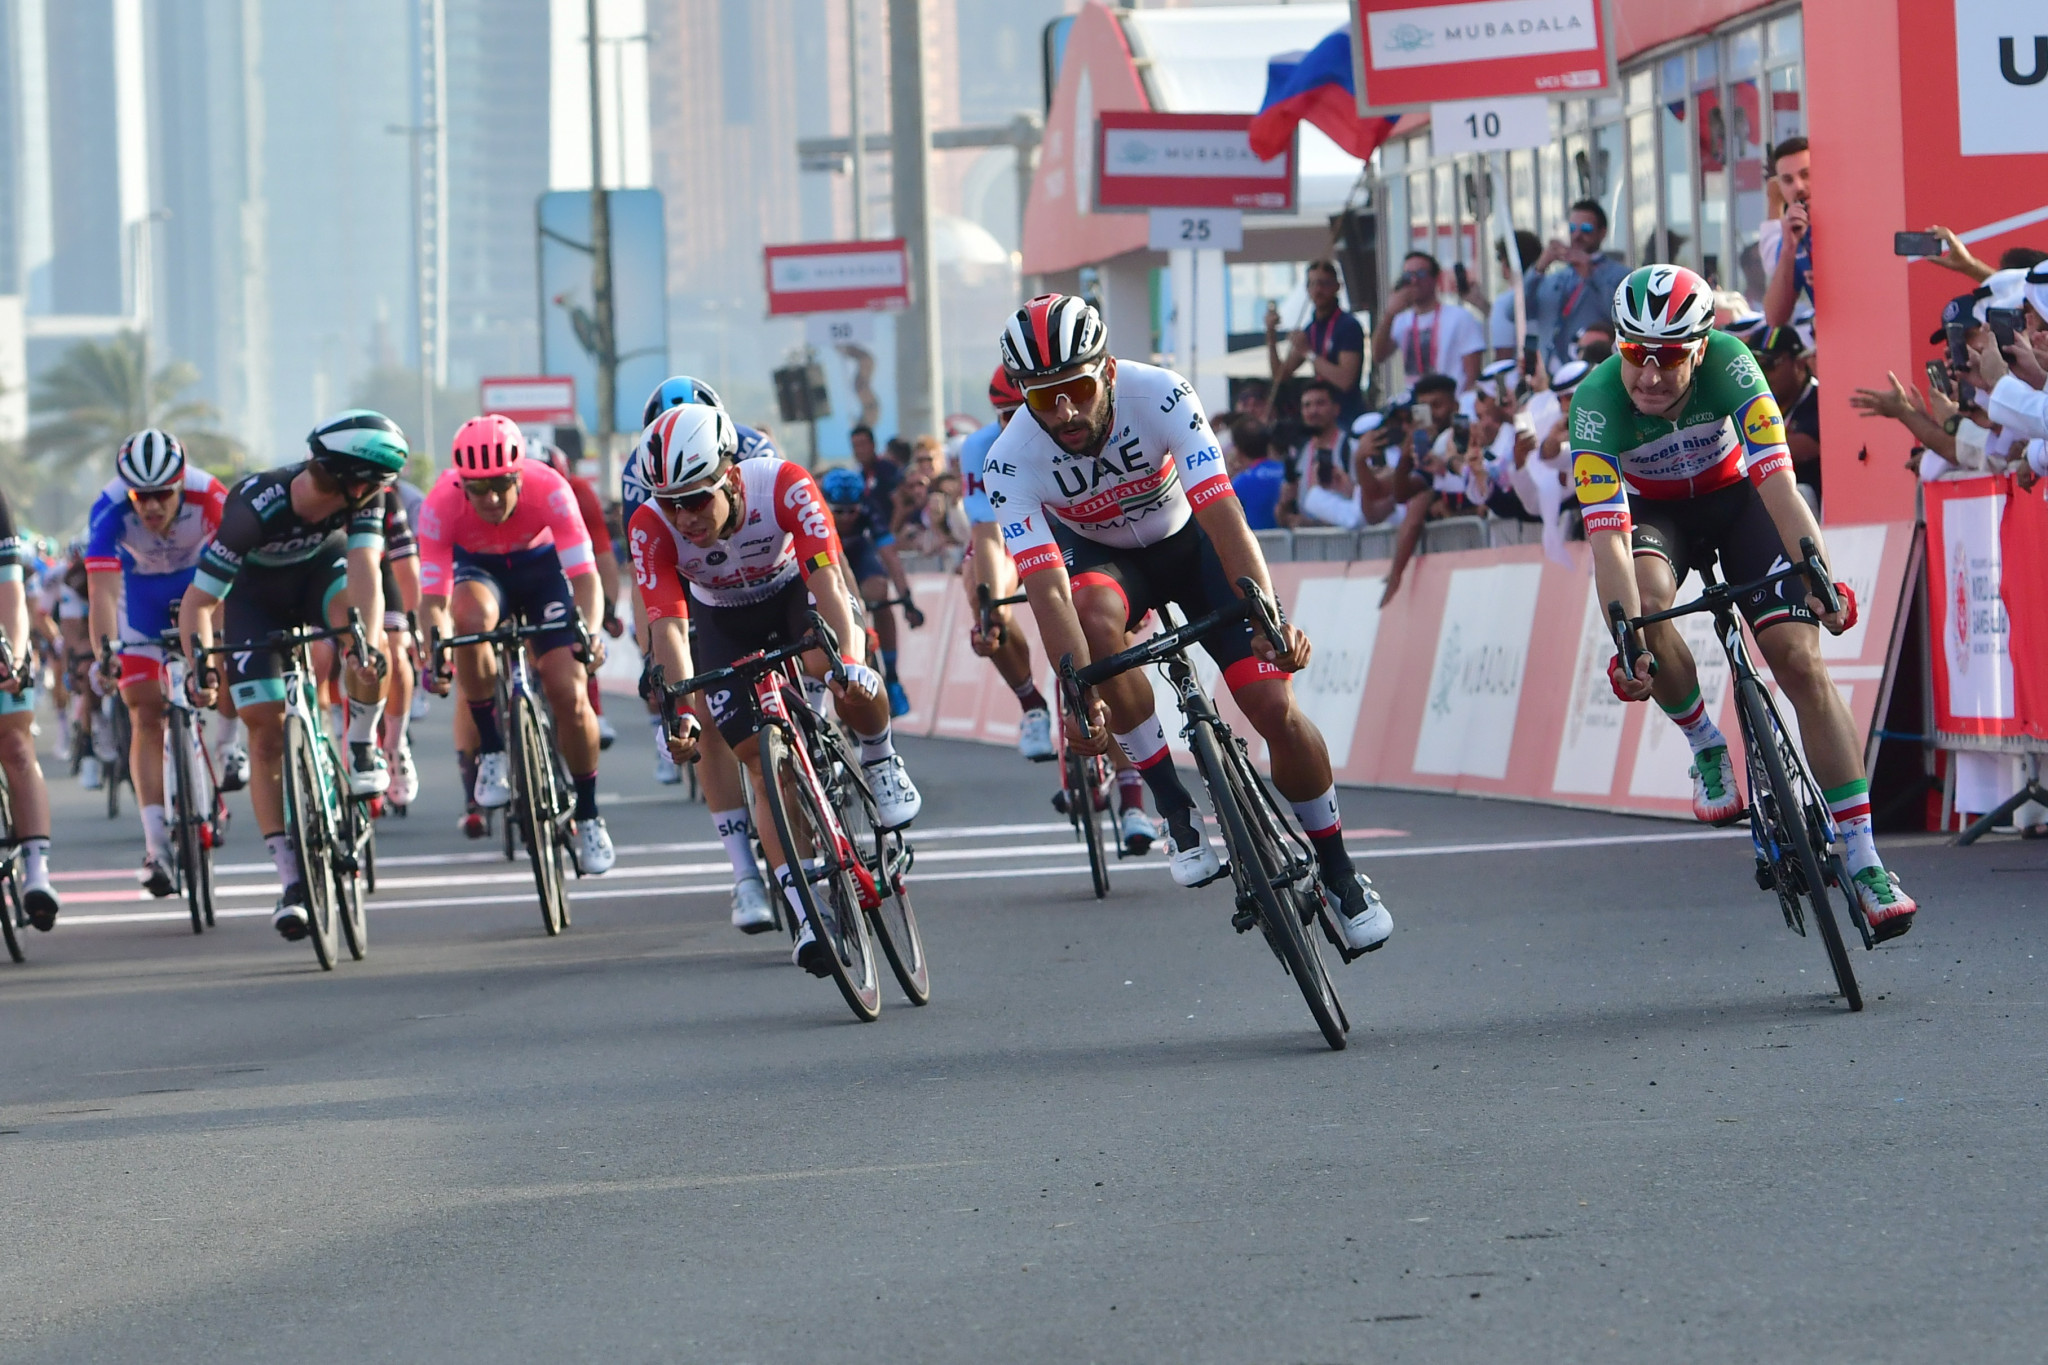 Colombia's Fernando Gaviria of UAE Team Emirates emerged victorious from a sprint finish ©Getty Images